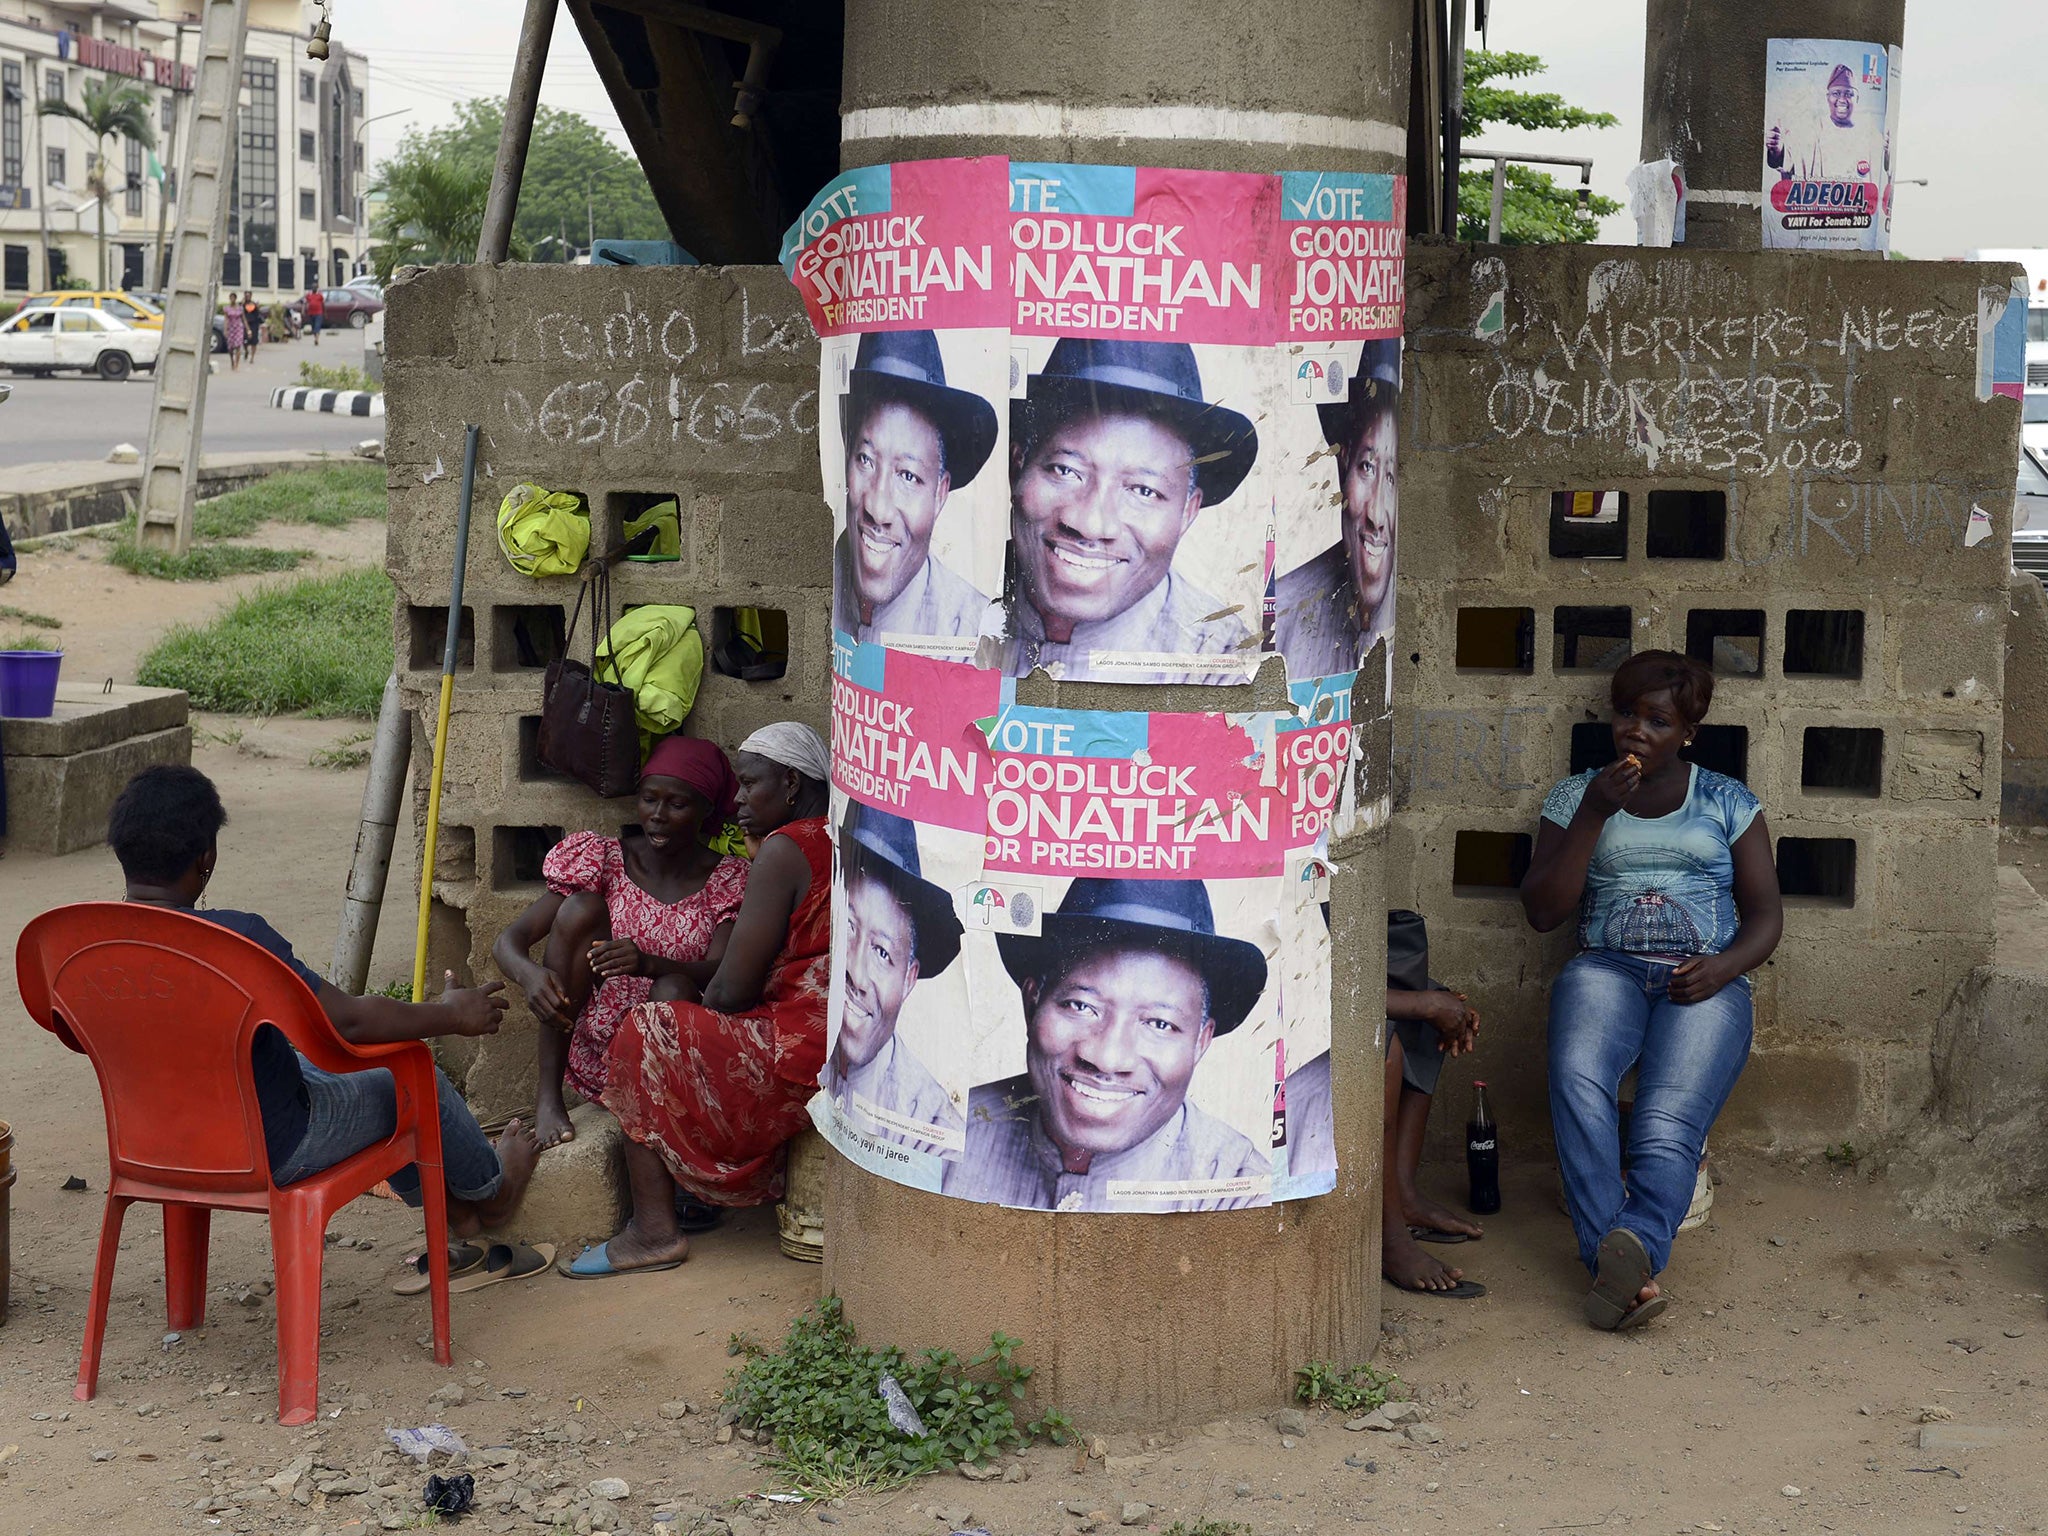 Goodluck Jonathan faces a strong election challenge